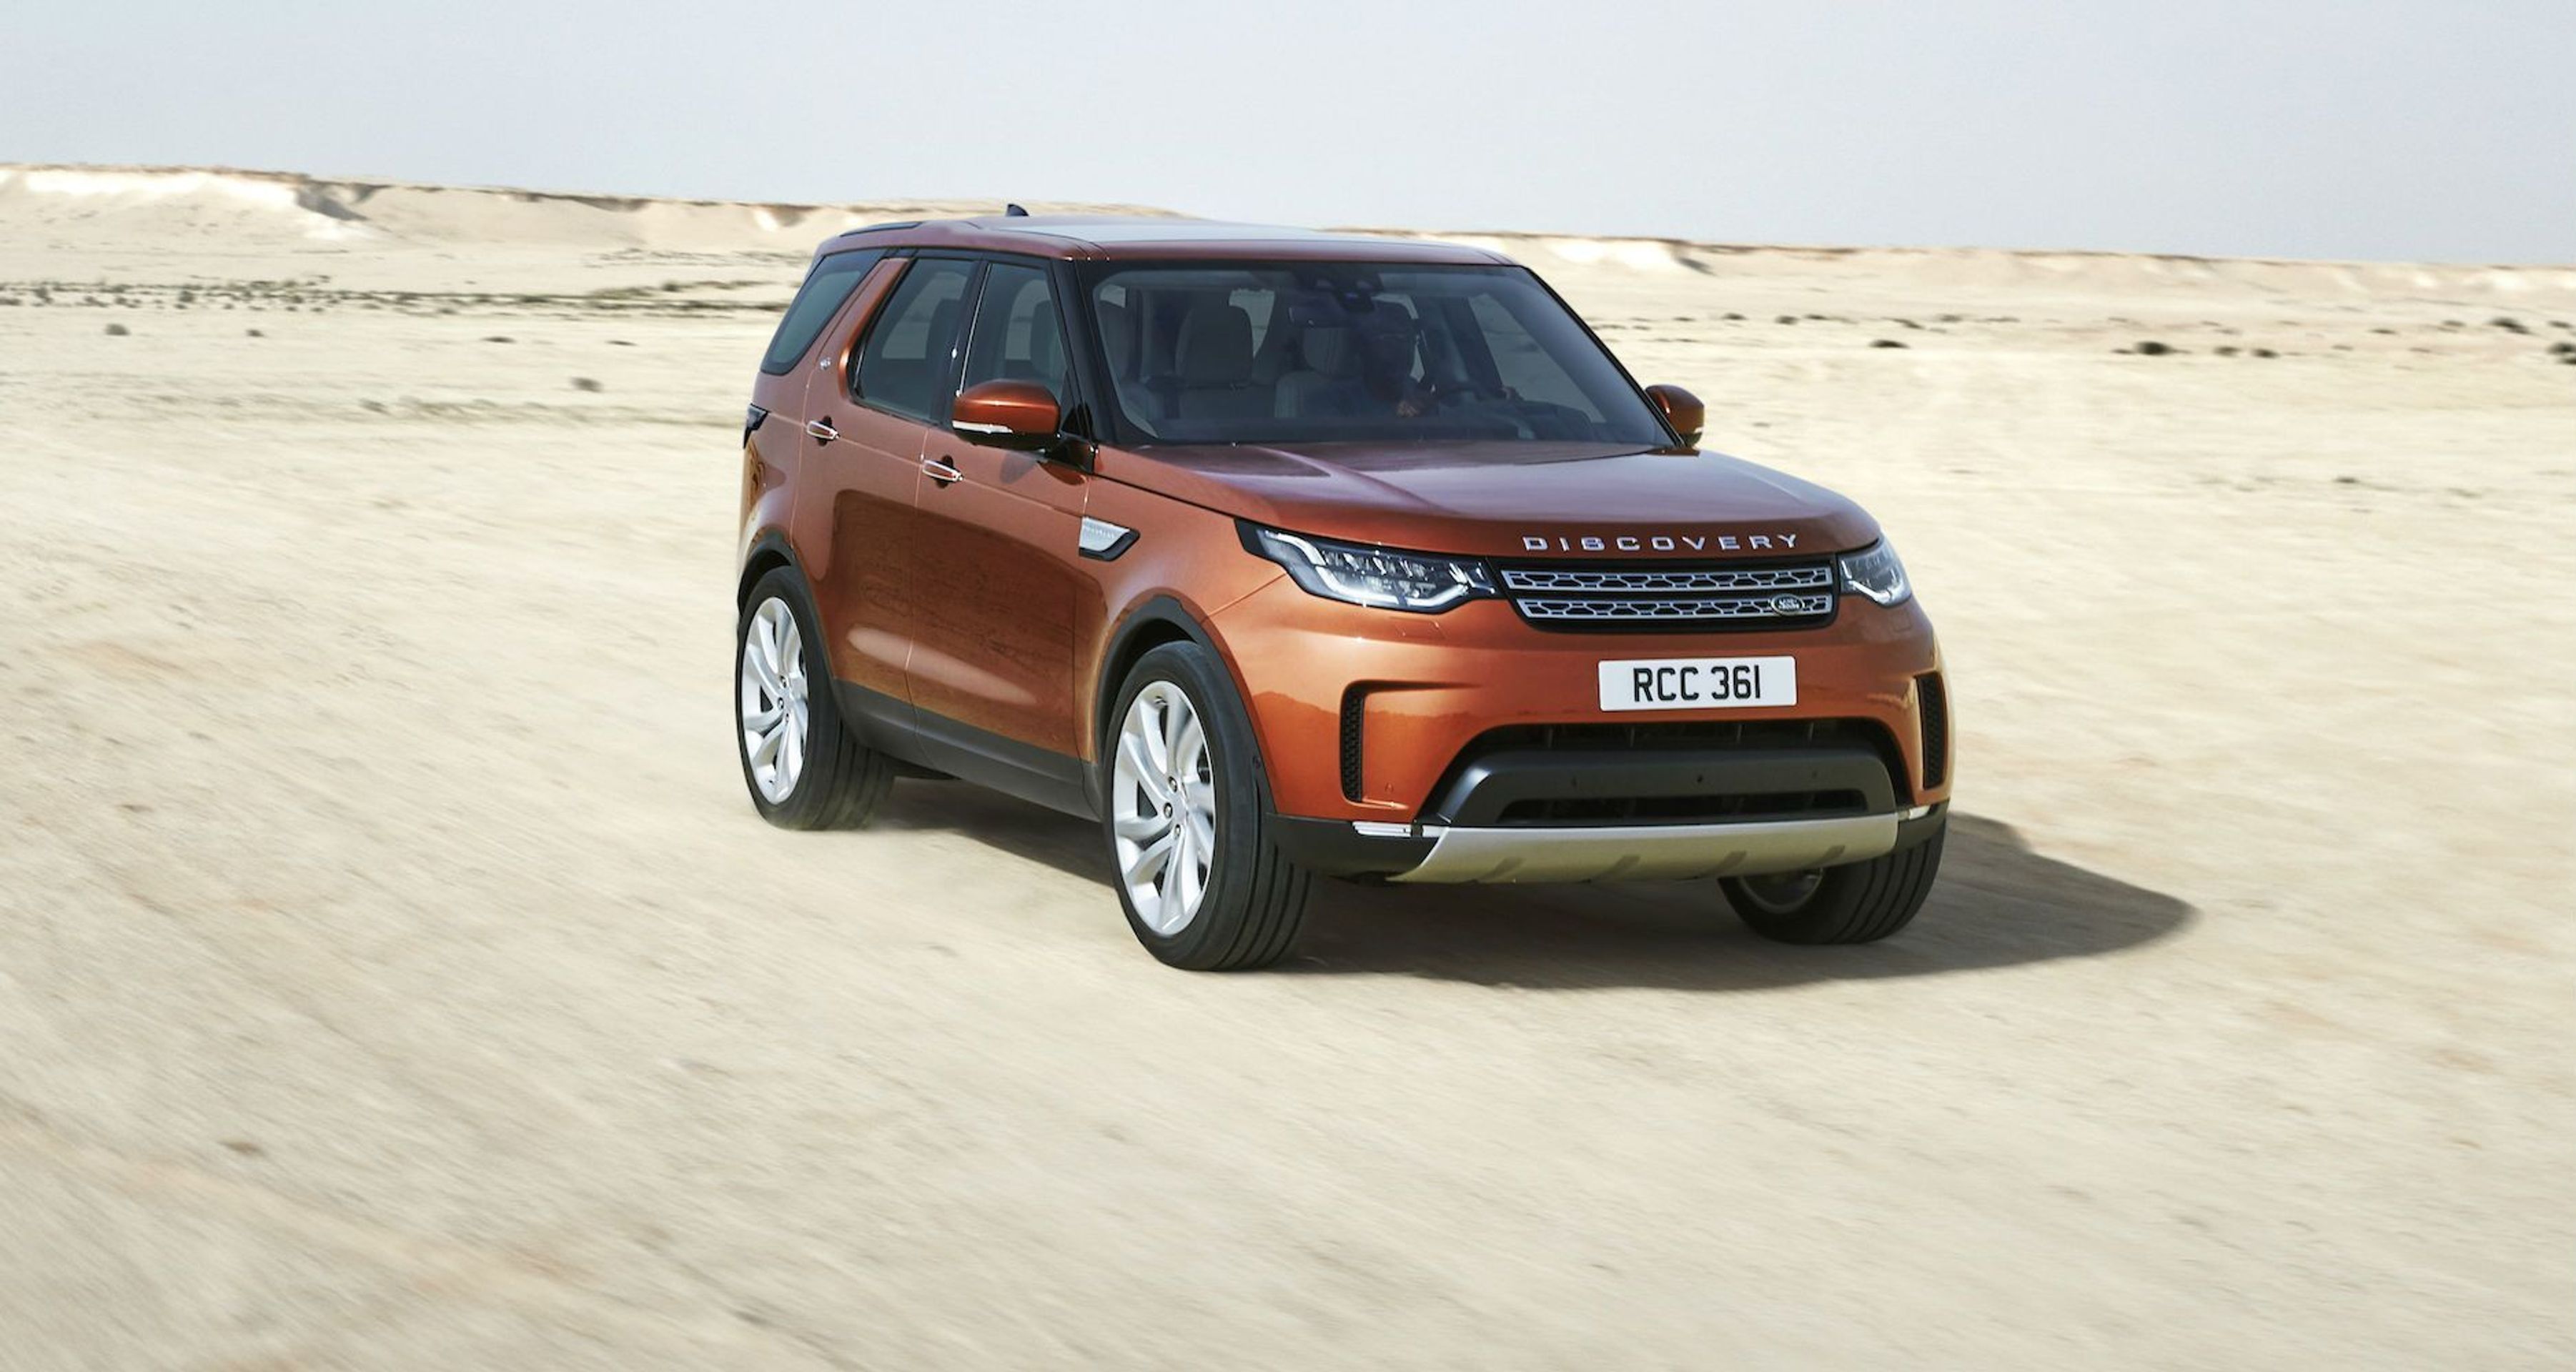 Discovery - 10 - GALERIE: Land Rover Discovery (6/7)